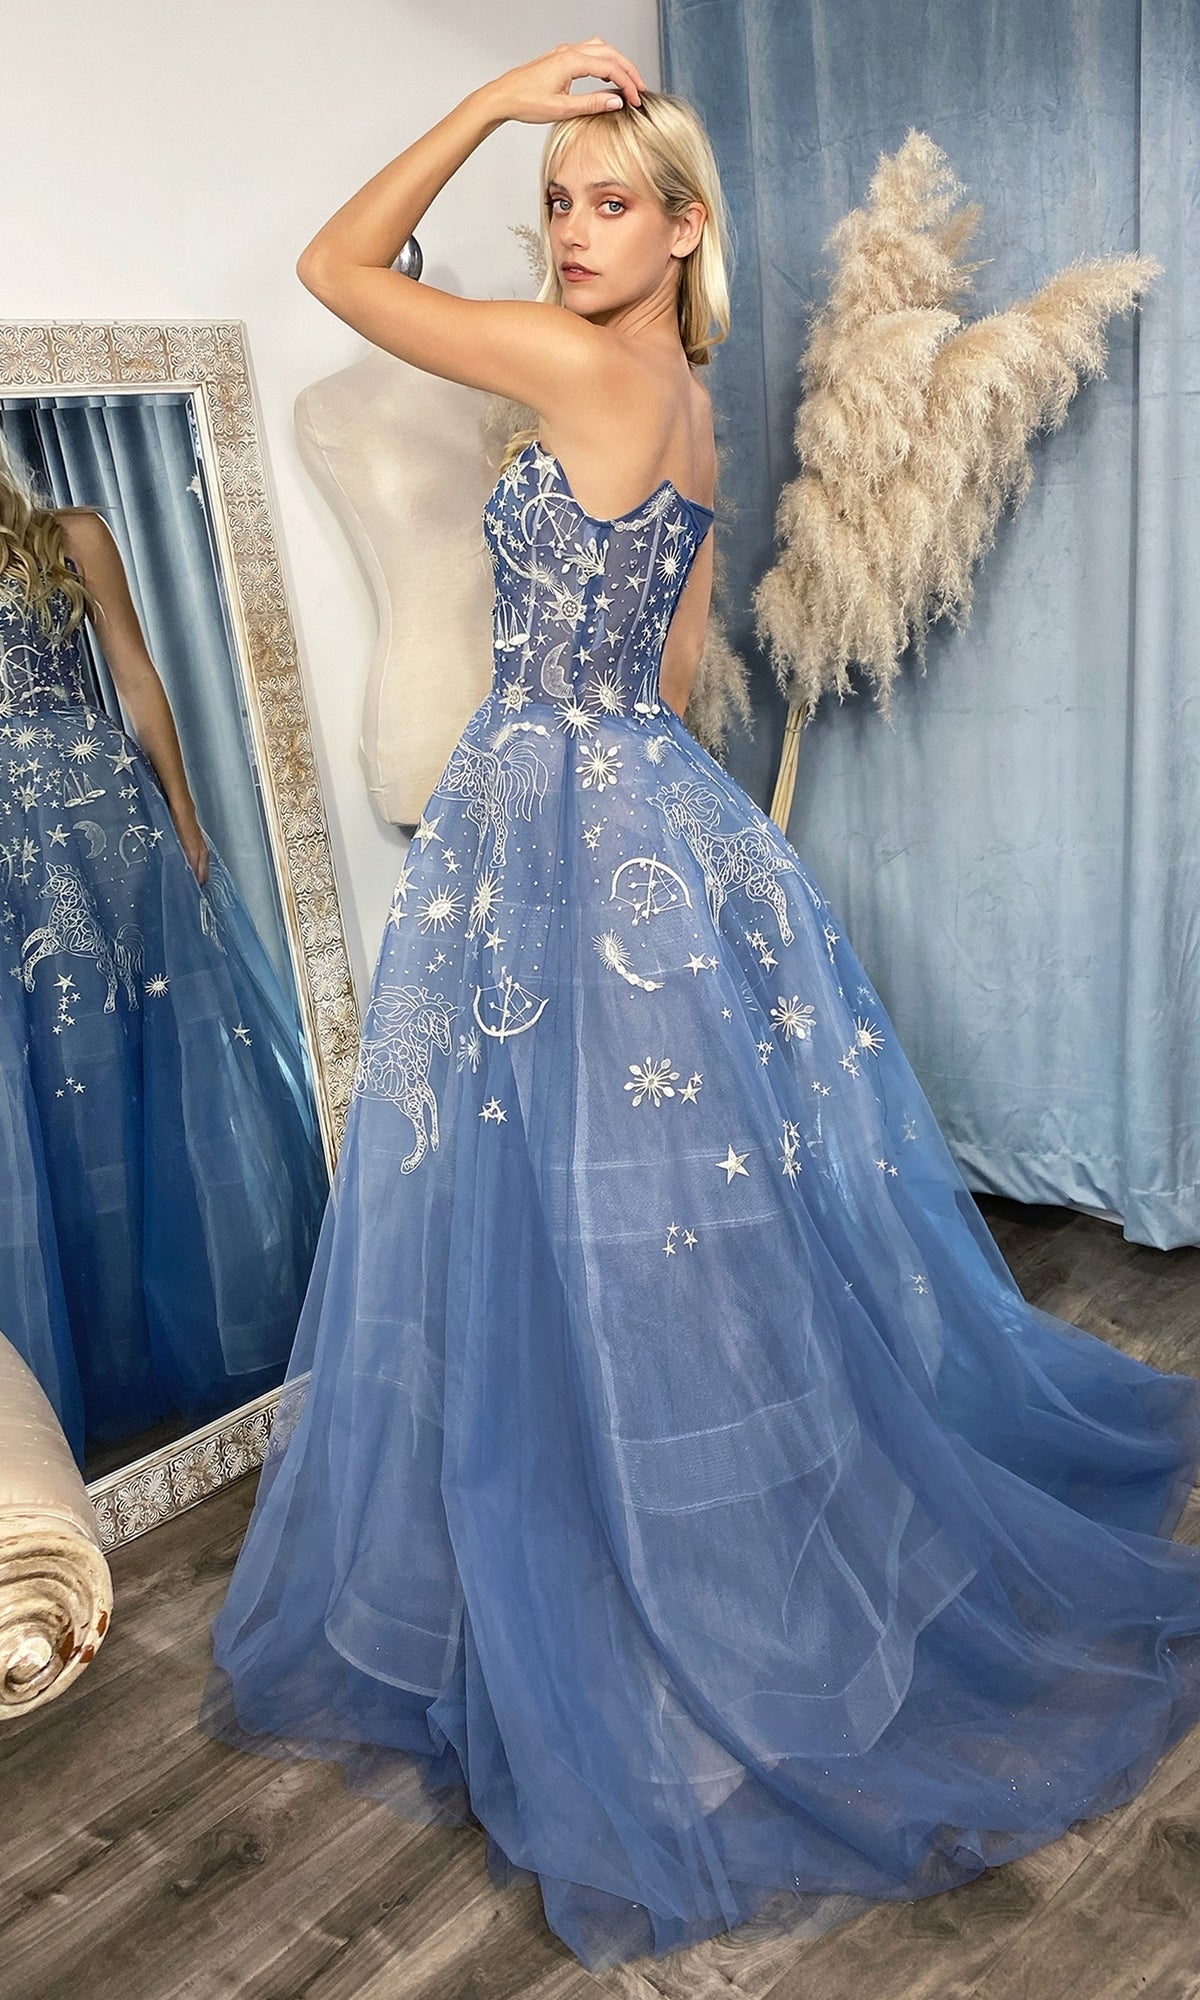 Constellation-Print Strapless Prom Ball Gown A0890